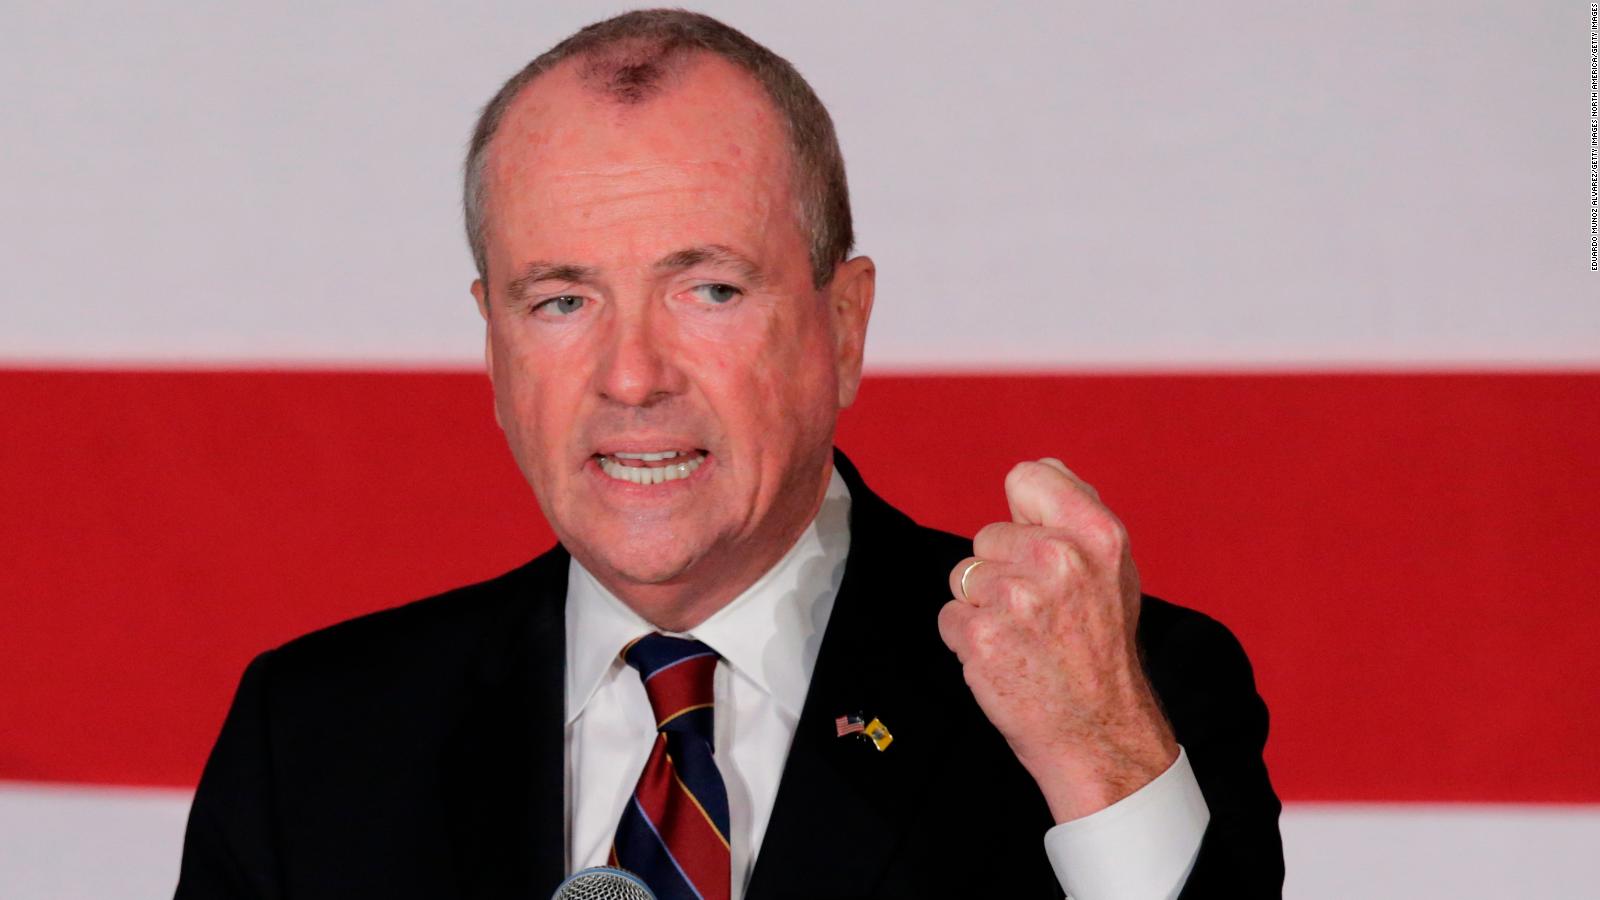 who won governor for new jersey